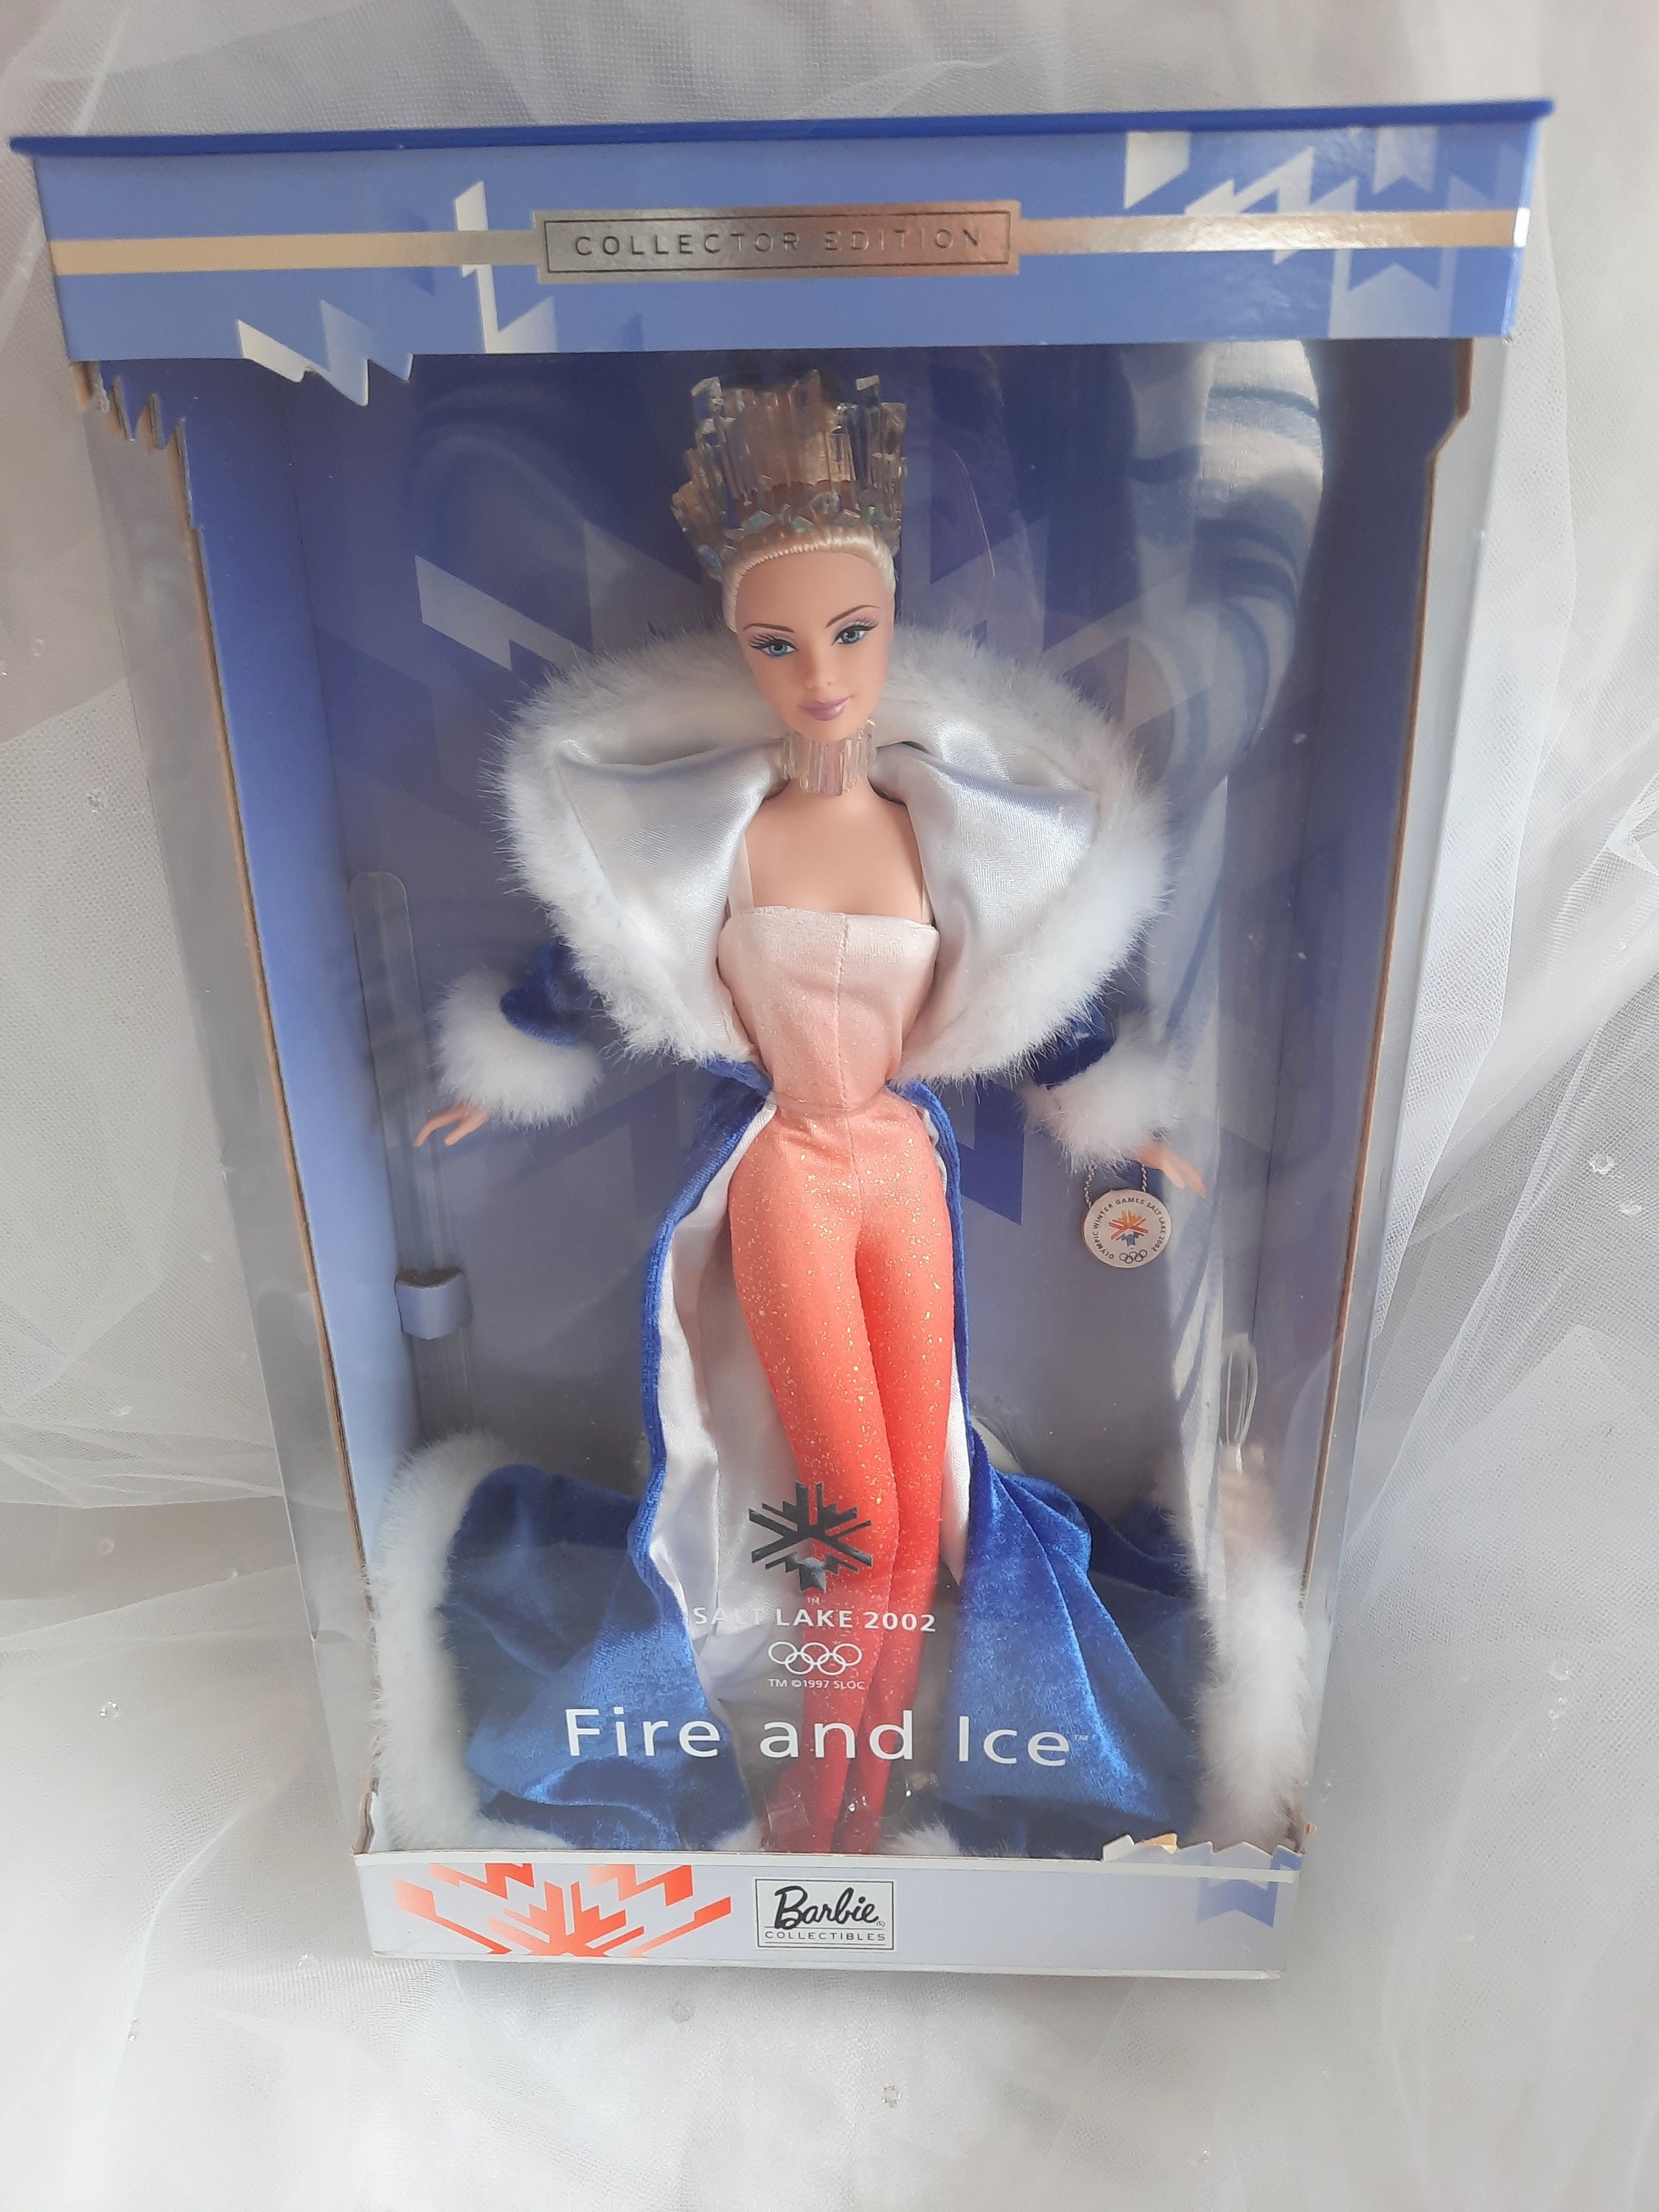 Collector Edition Salt Lake 2002 Fire and Ice Barbie Collectibles, Vintage Barbie  Doll, Collector Edition Olympic Barbie, Toys, New Barbie 